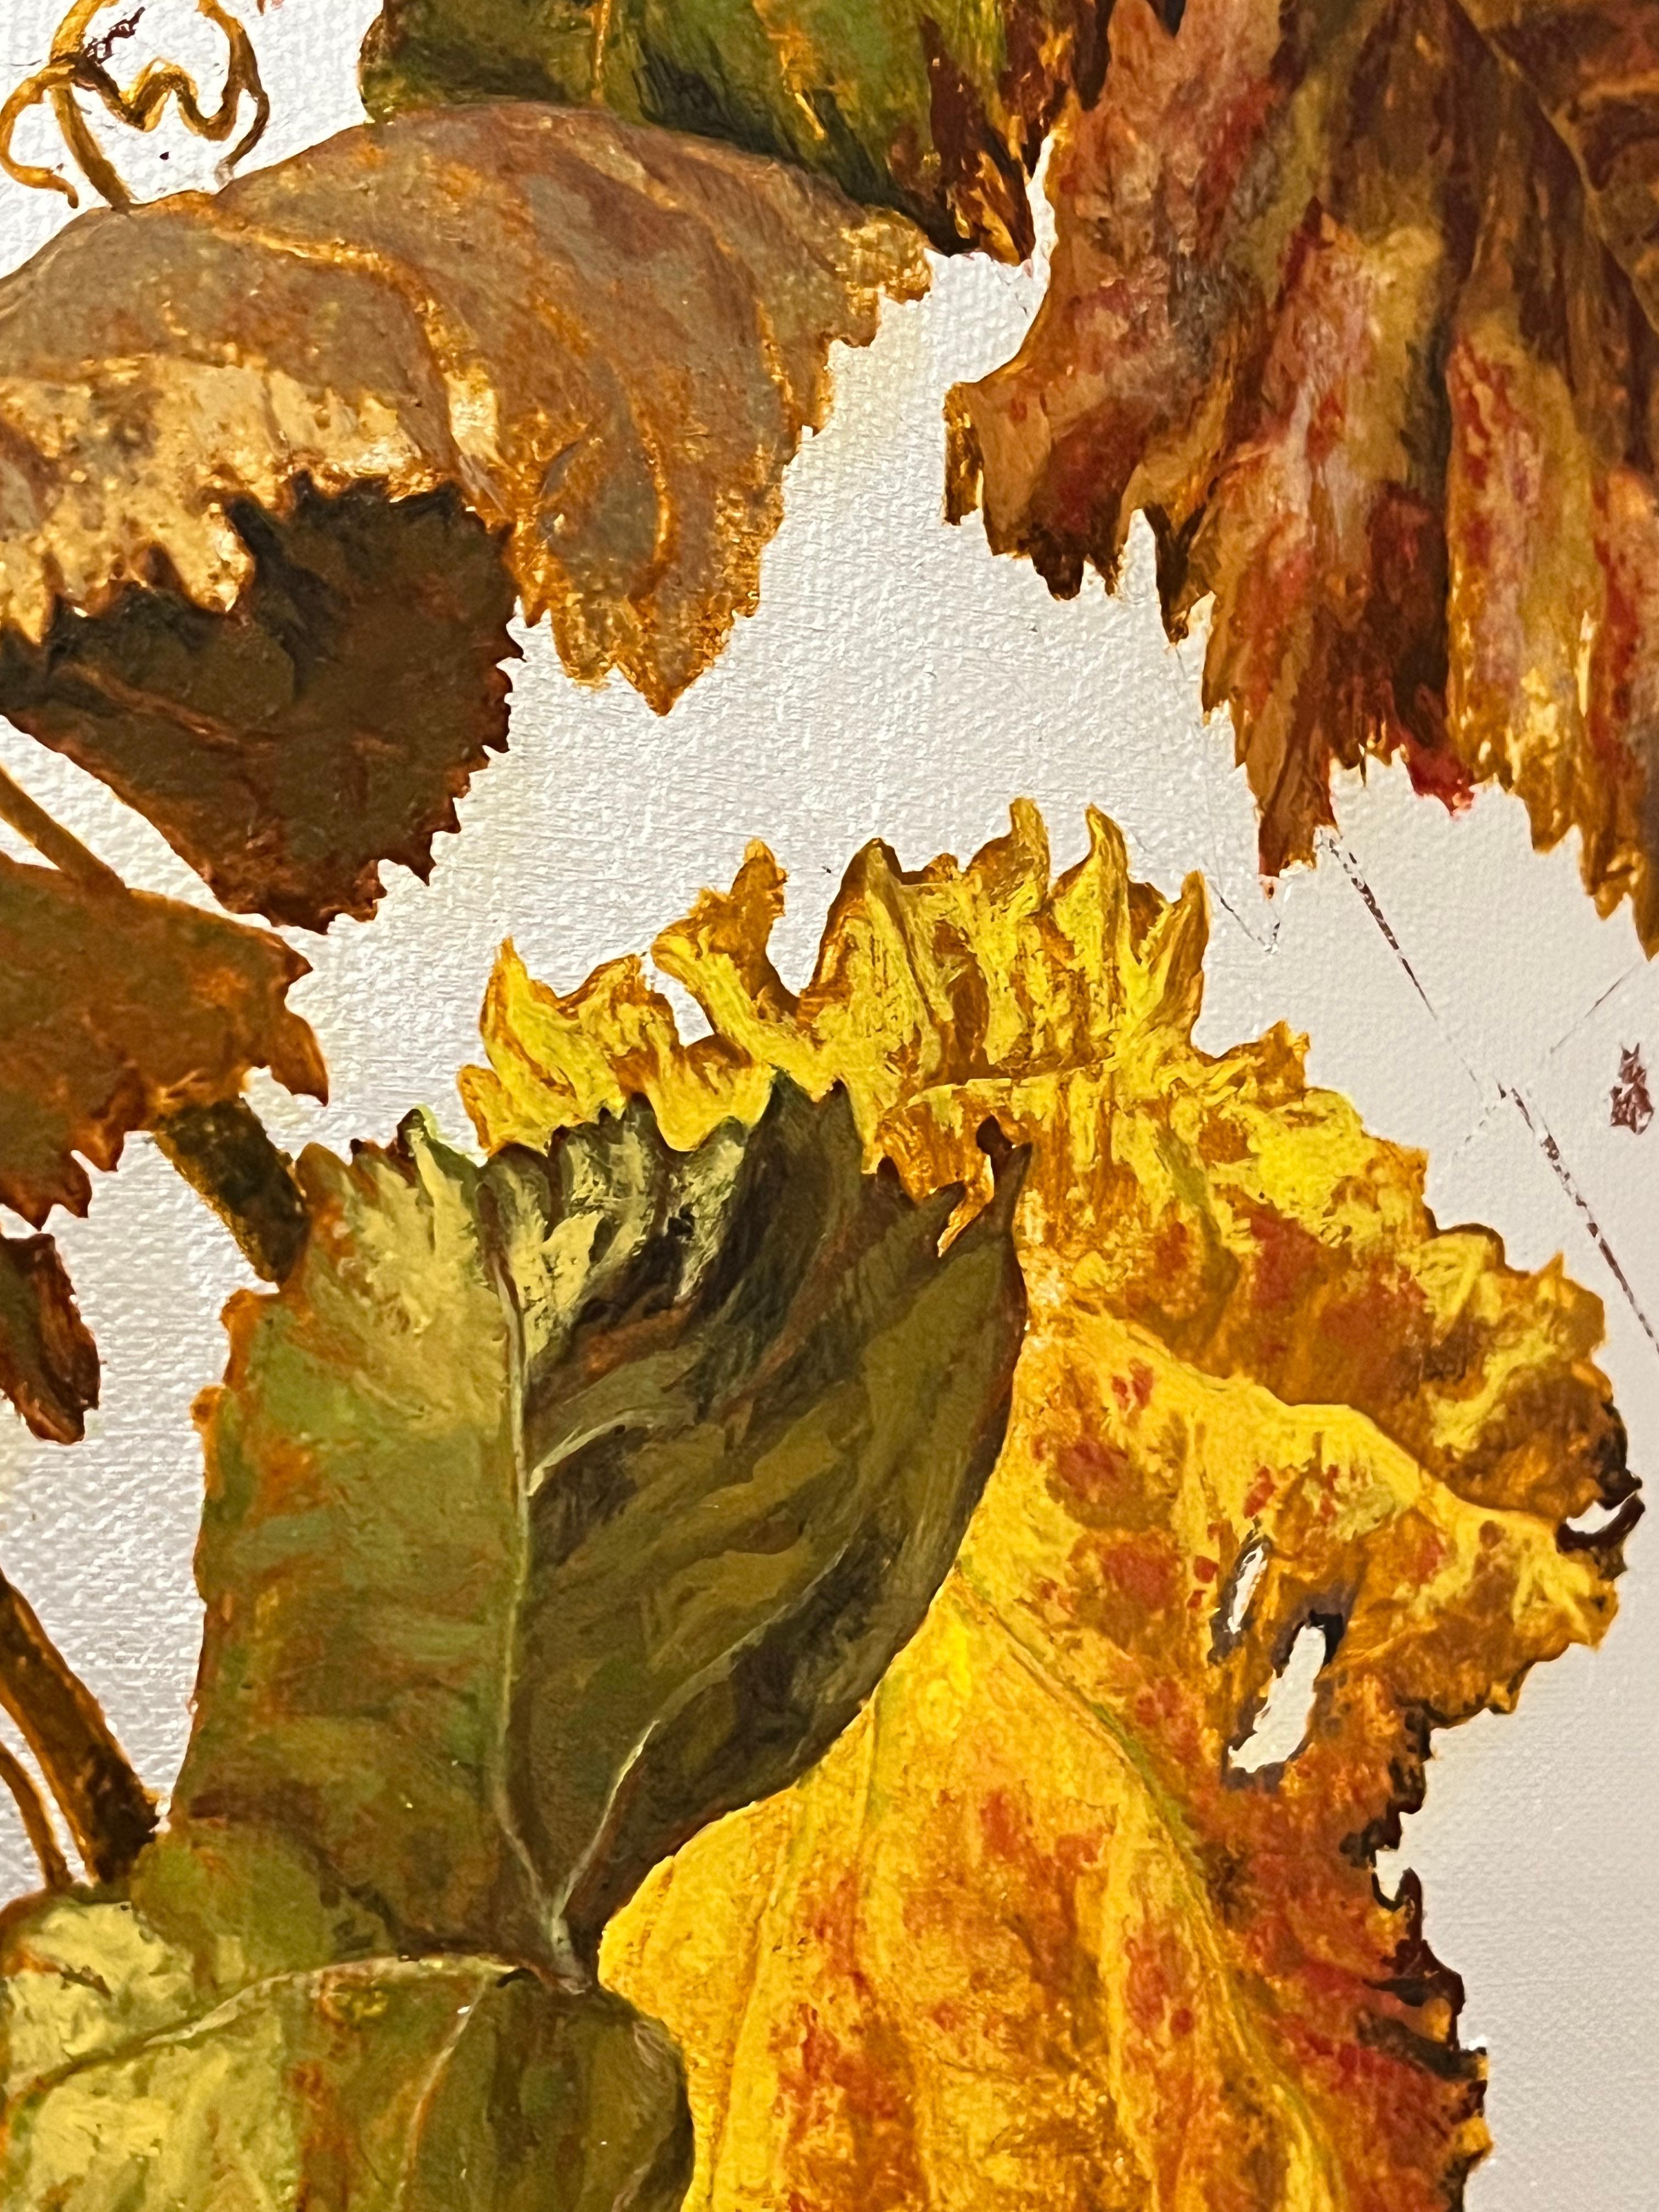 Autumn vine shoot on a silver background - Realist Painting by Margherita Leoni